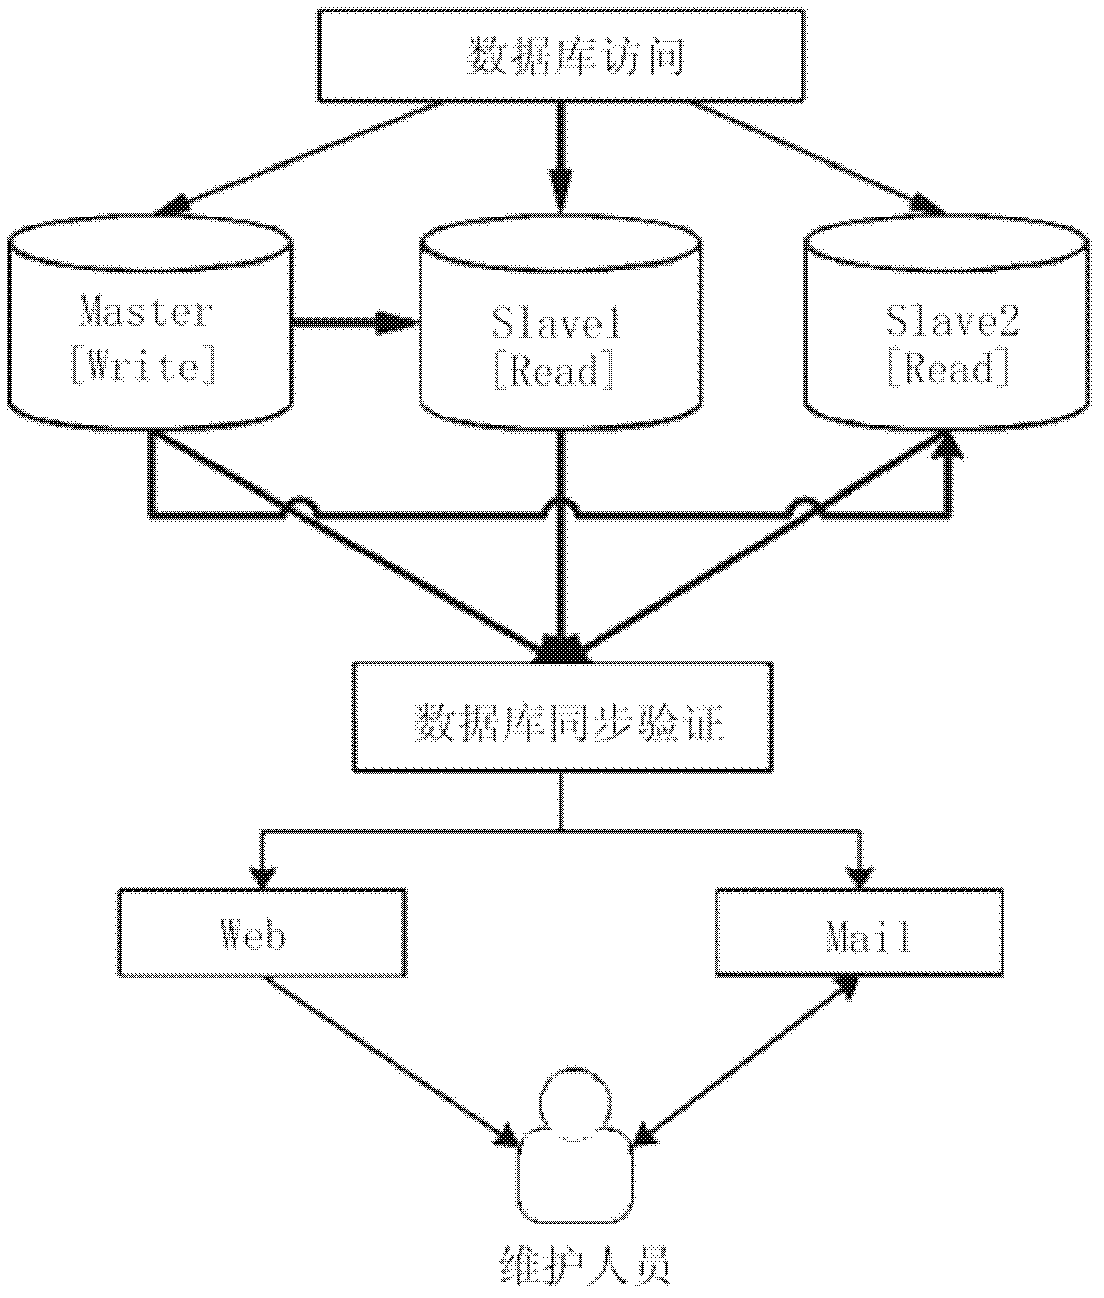 Method for synchronously verifying and monitoring databases